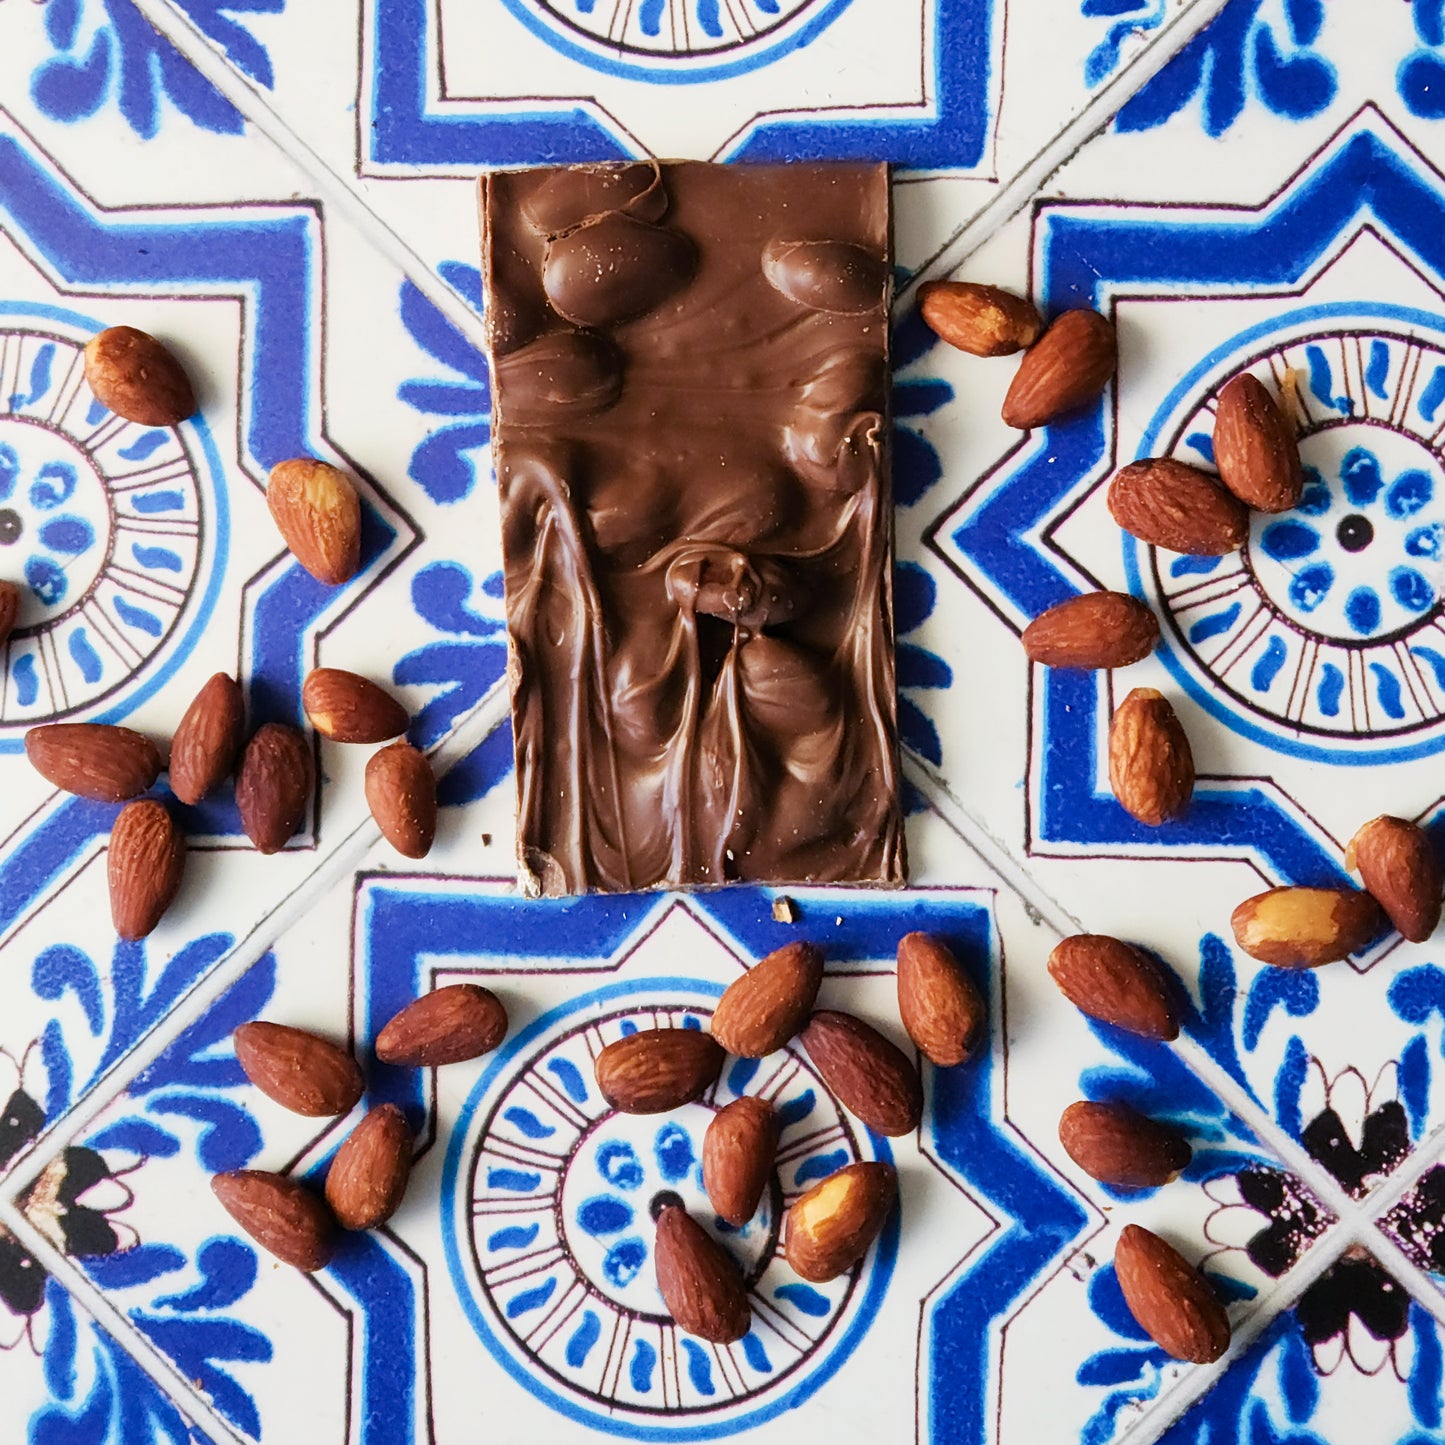 creamy milk chocolate mixed with salted almonds for a sweet and savory treat.